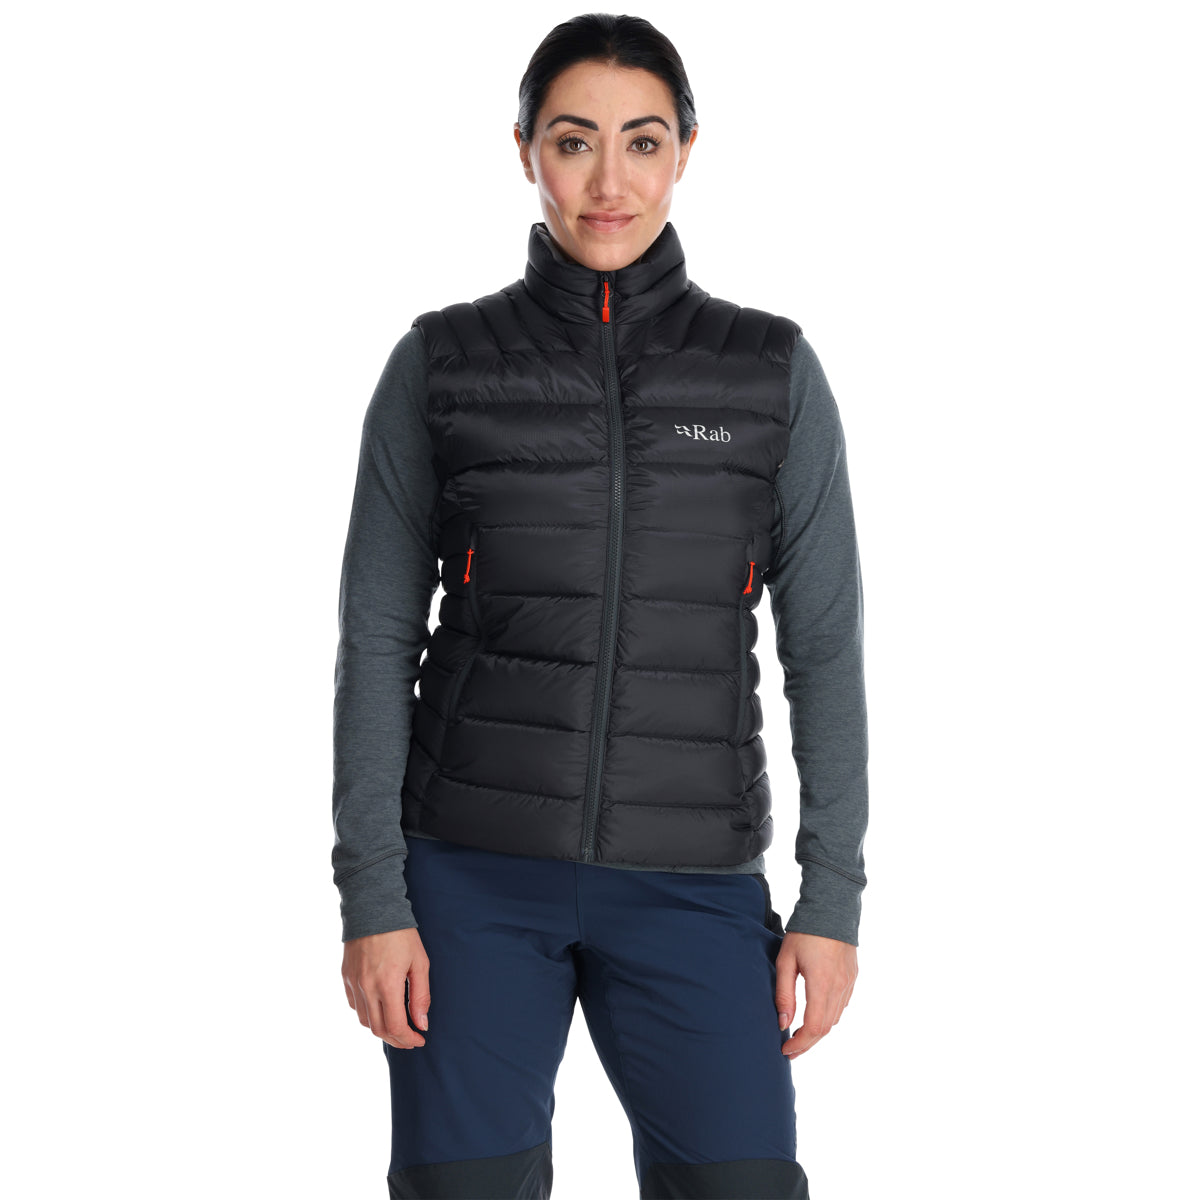 Rab Electron Pro Insulated Women's Vest | Anthracite